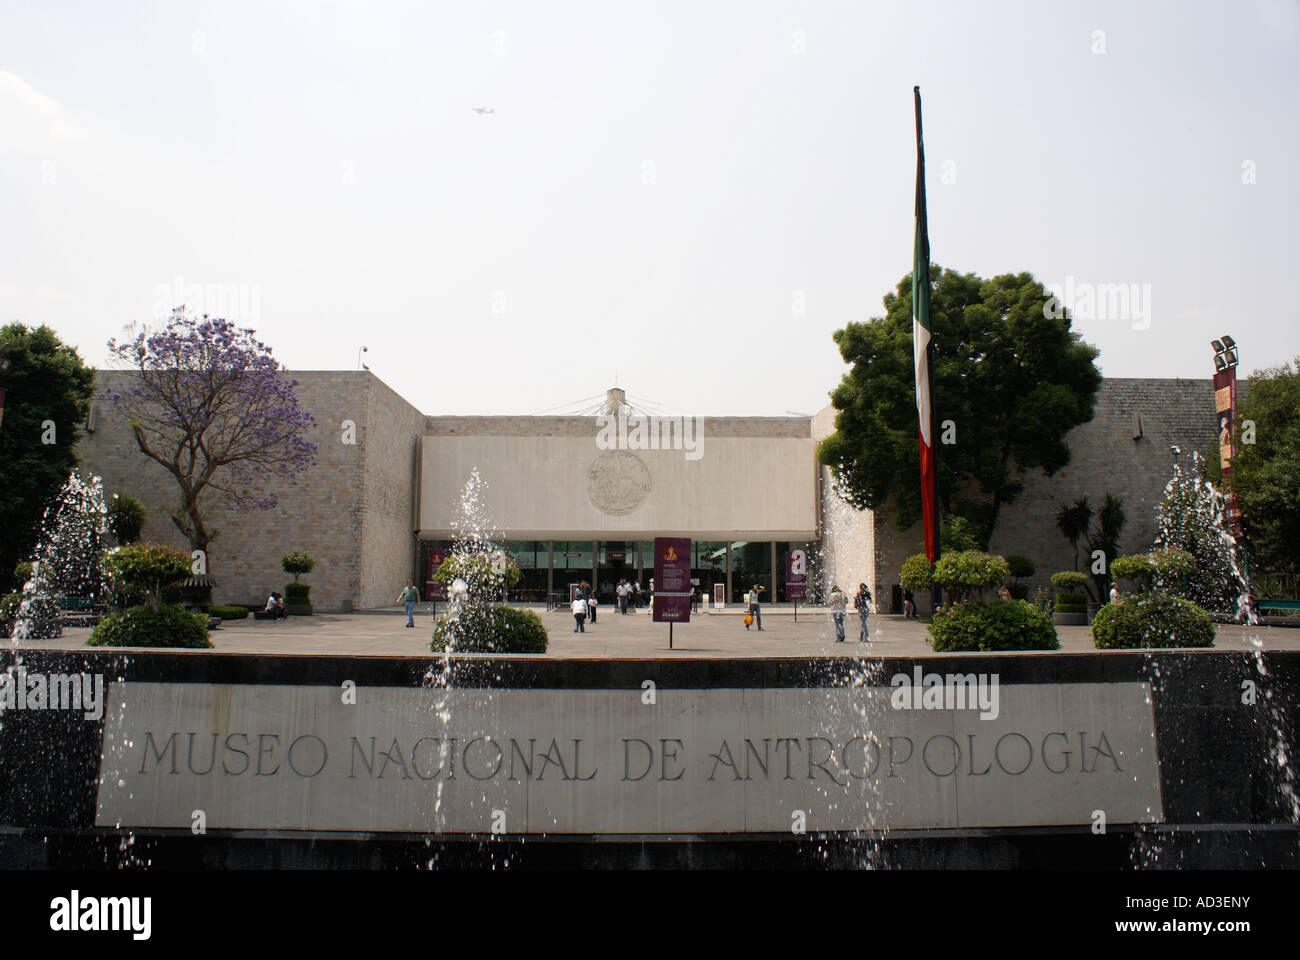 Entrance to the National Museum of Anthropology in Chapultepec Park, Mexico  City. Museo Nacional de Antropologia Stock Photo - Alamy